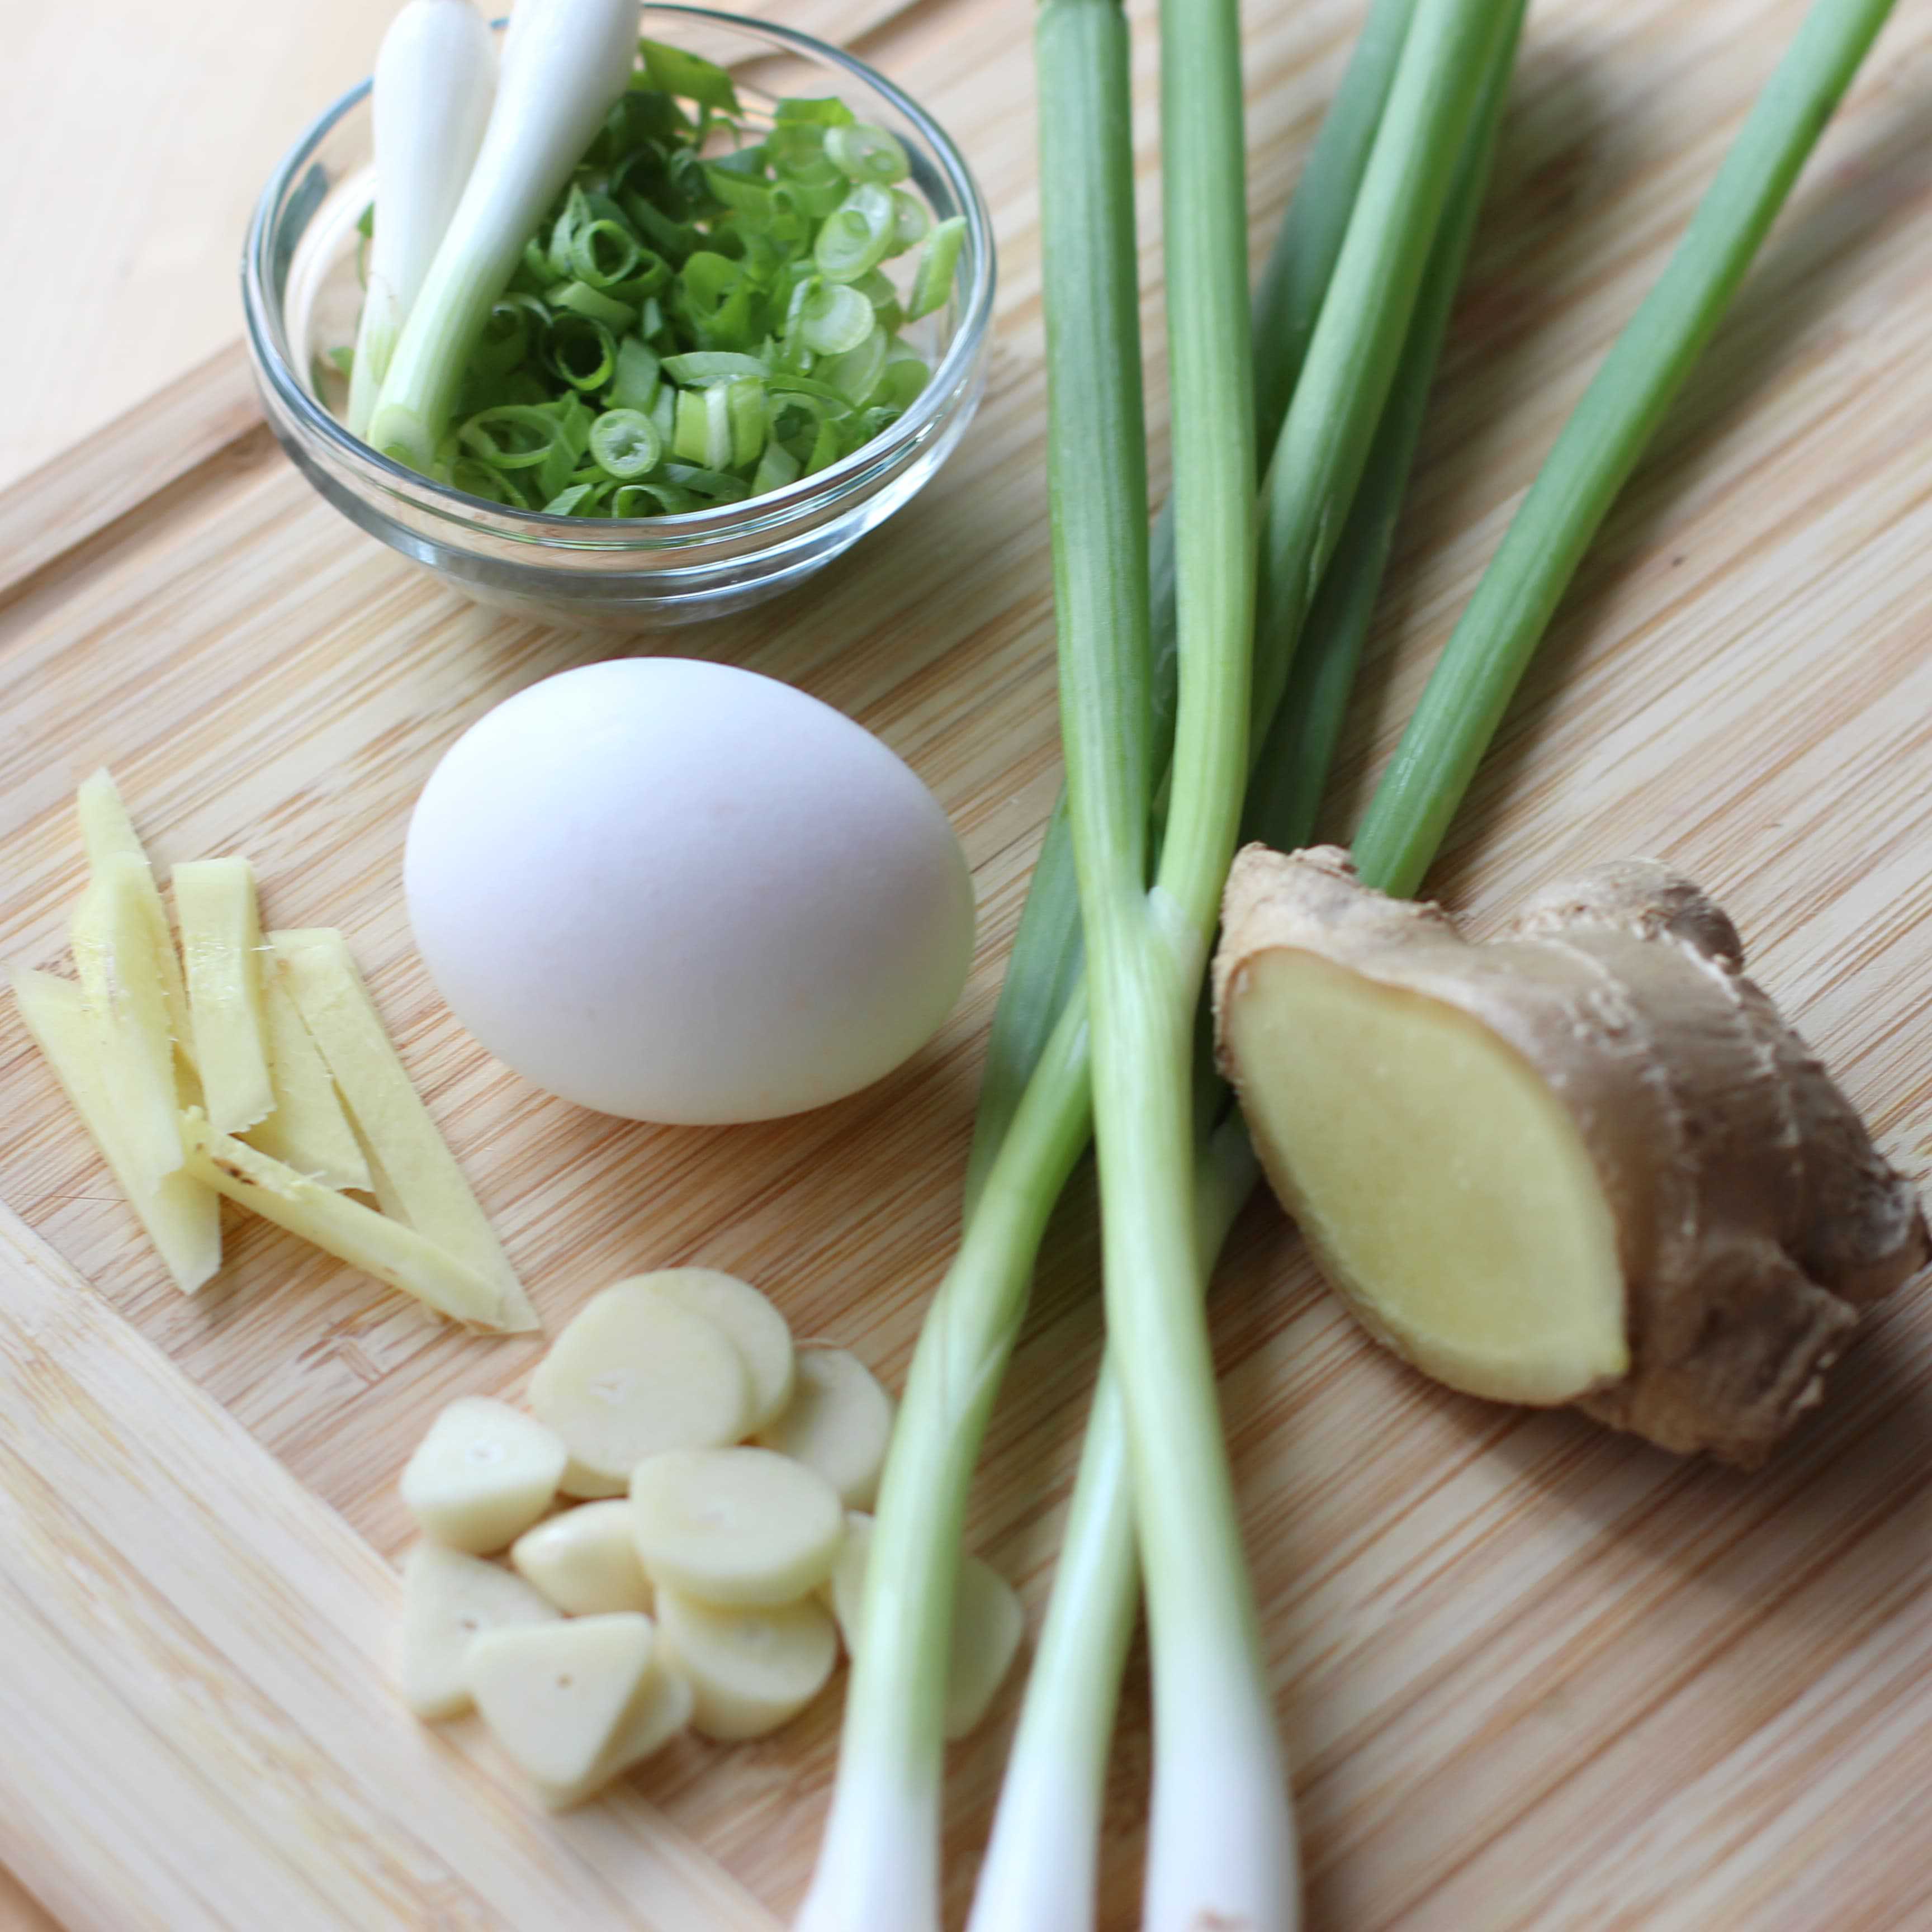 Ingredients for Egg Drop Soup